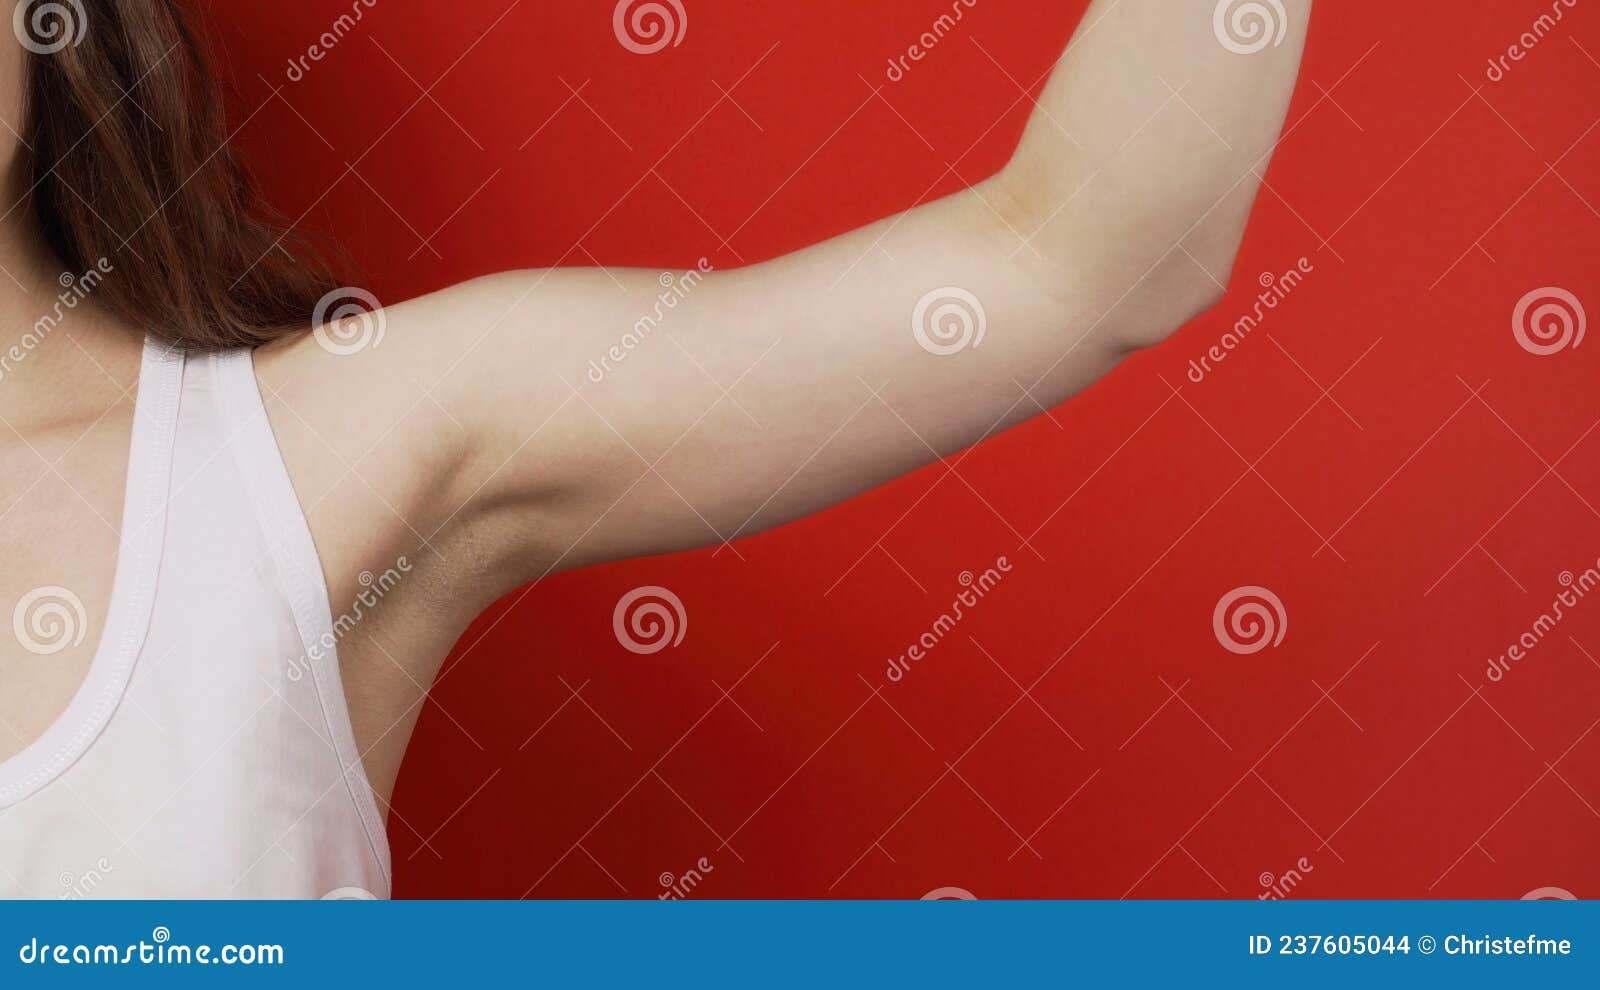 Photo Of The Woman Showing The Armpit Stock Photo Image Of